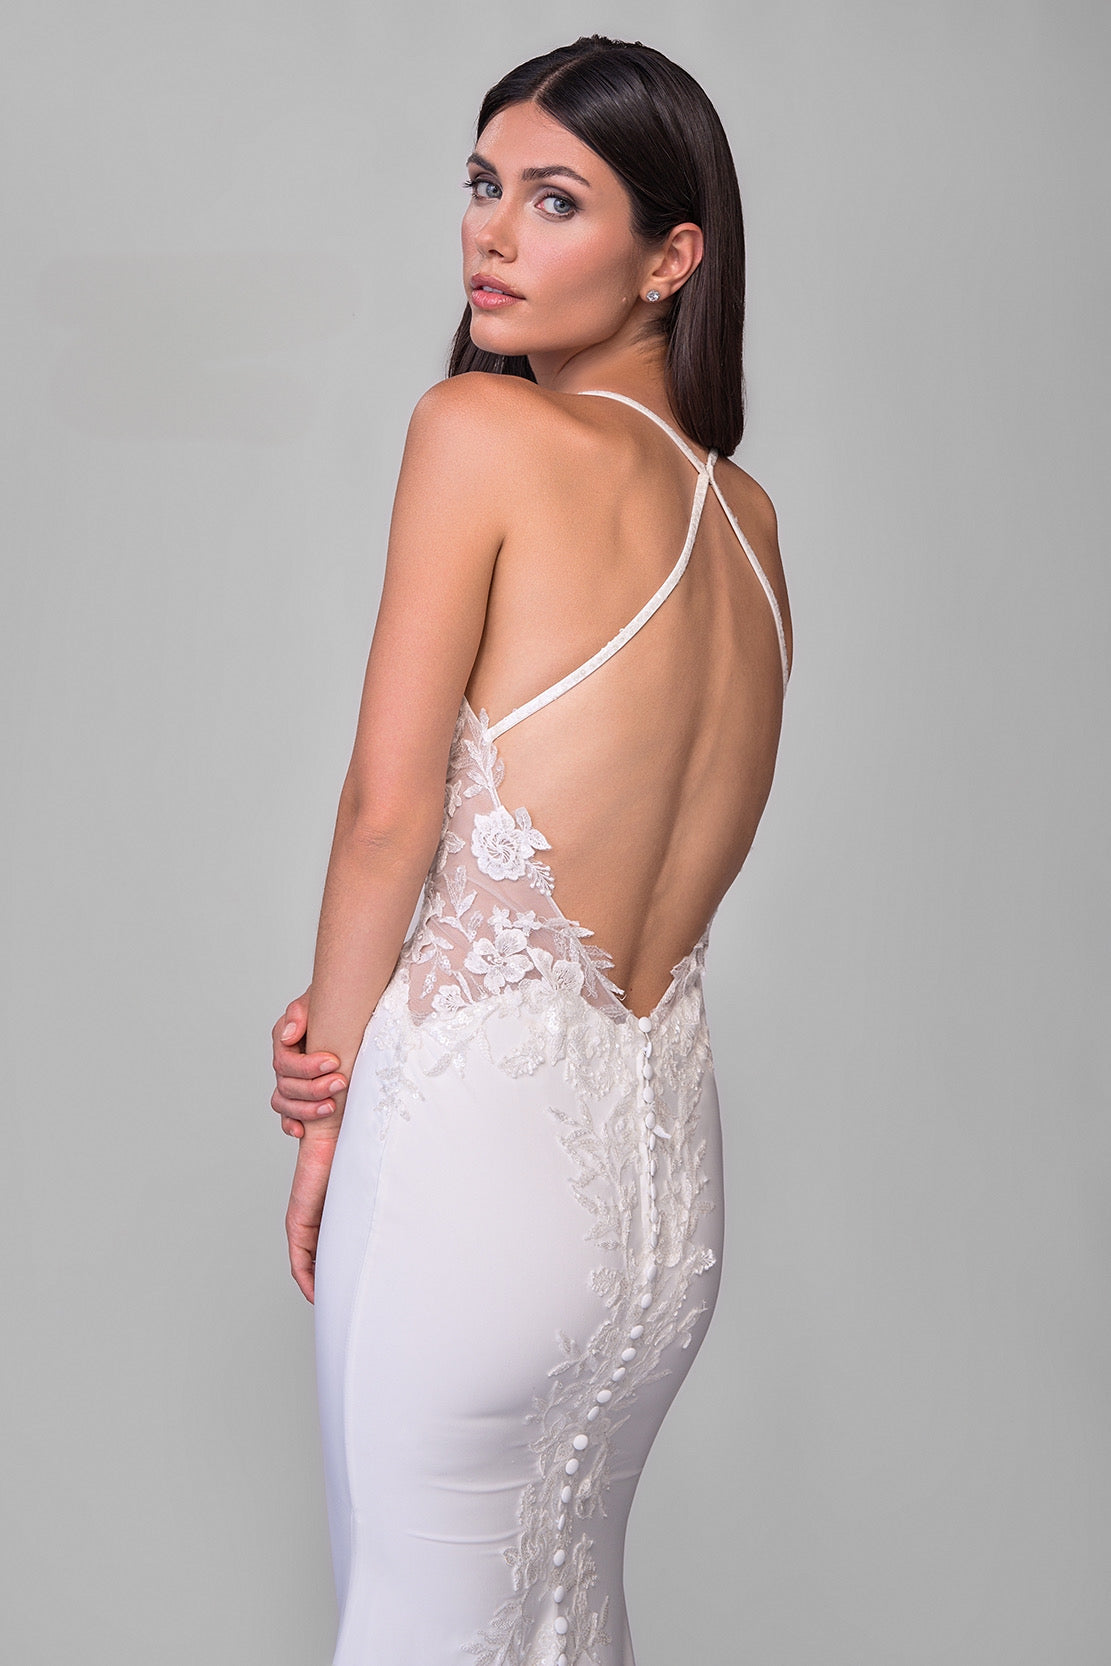 Joelle Oliva By La Femme J2165 Luna Bridal Gown - A luxurious jersey and lace bridal gown with an illusion back, lace applique bodice, and a sweeping train for a dramatic entrance.